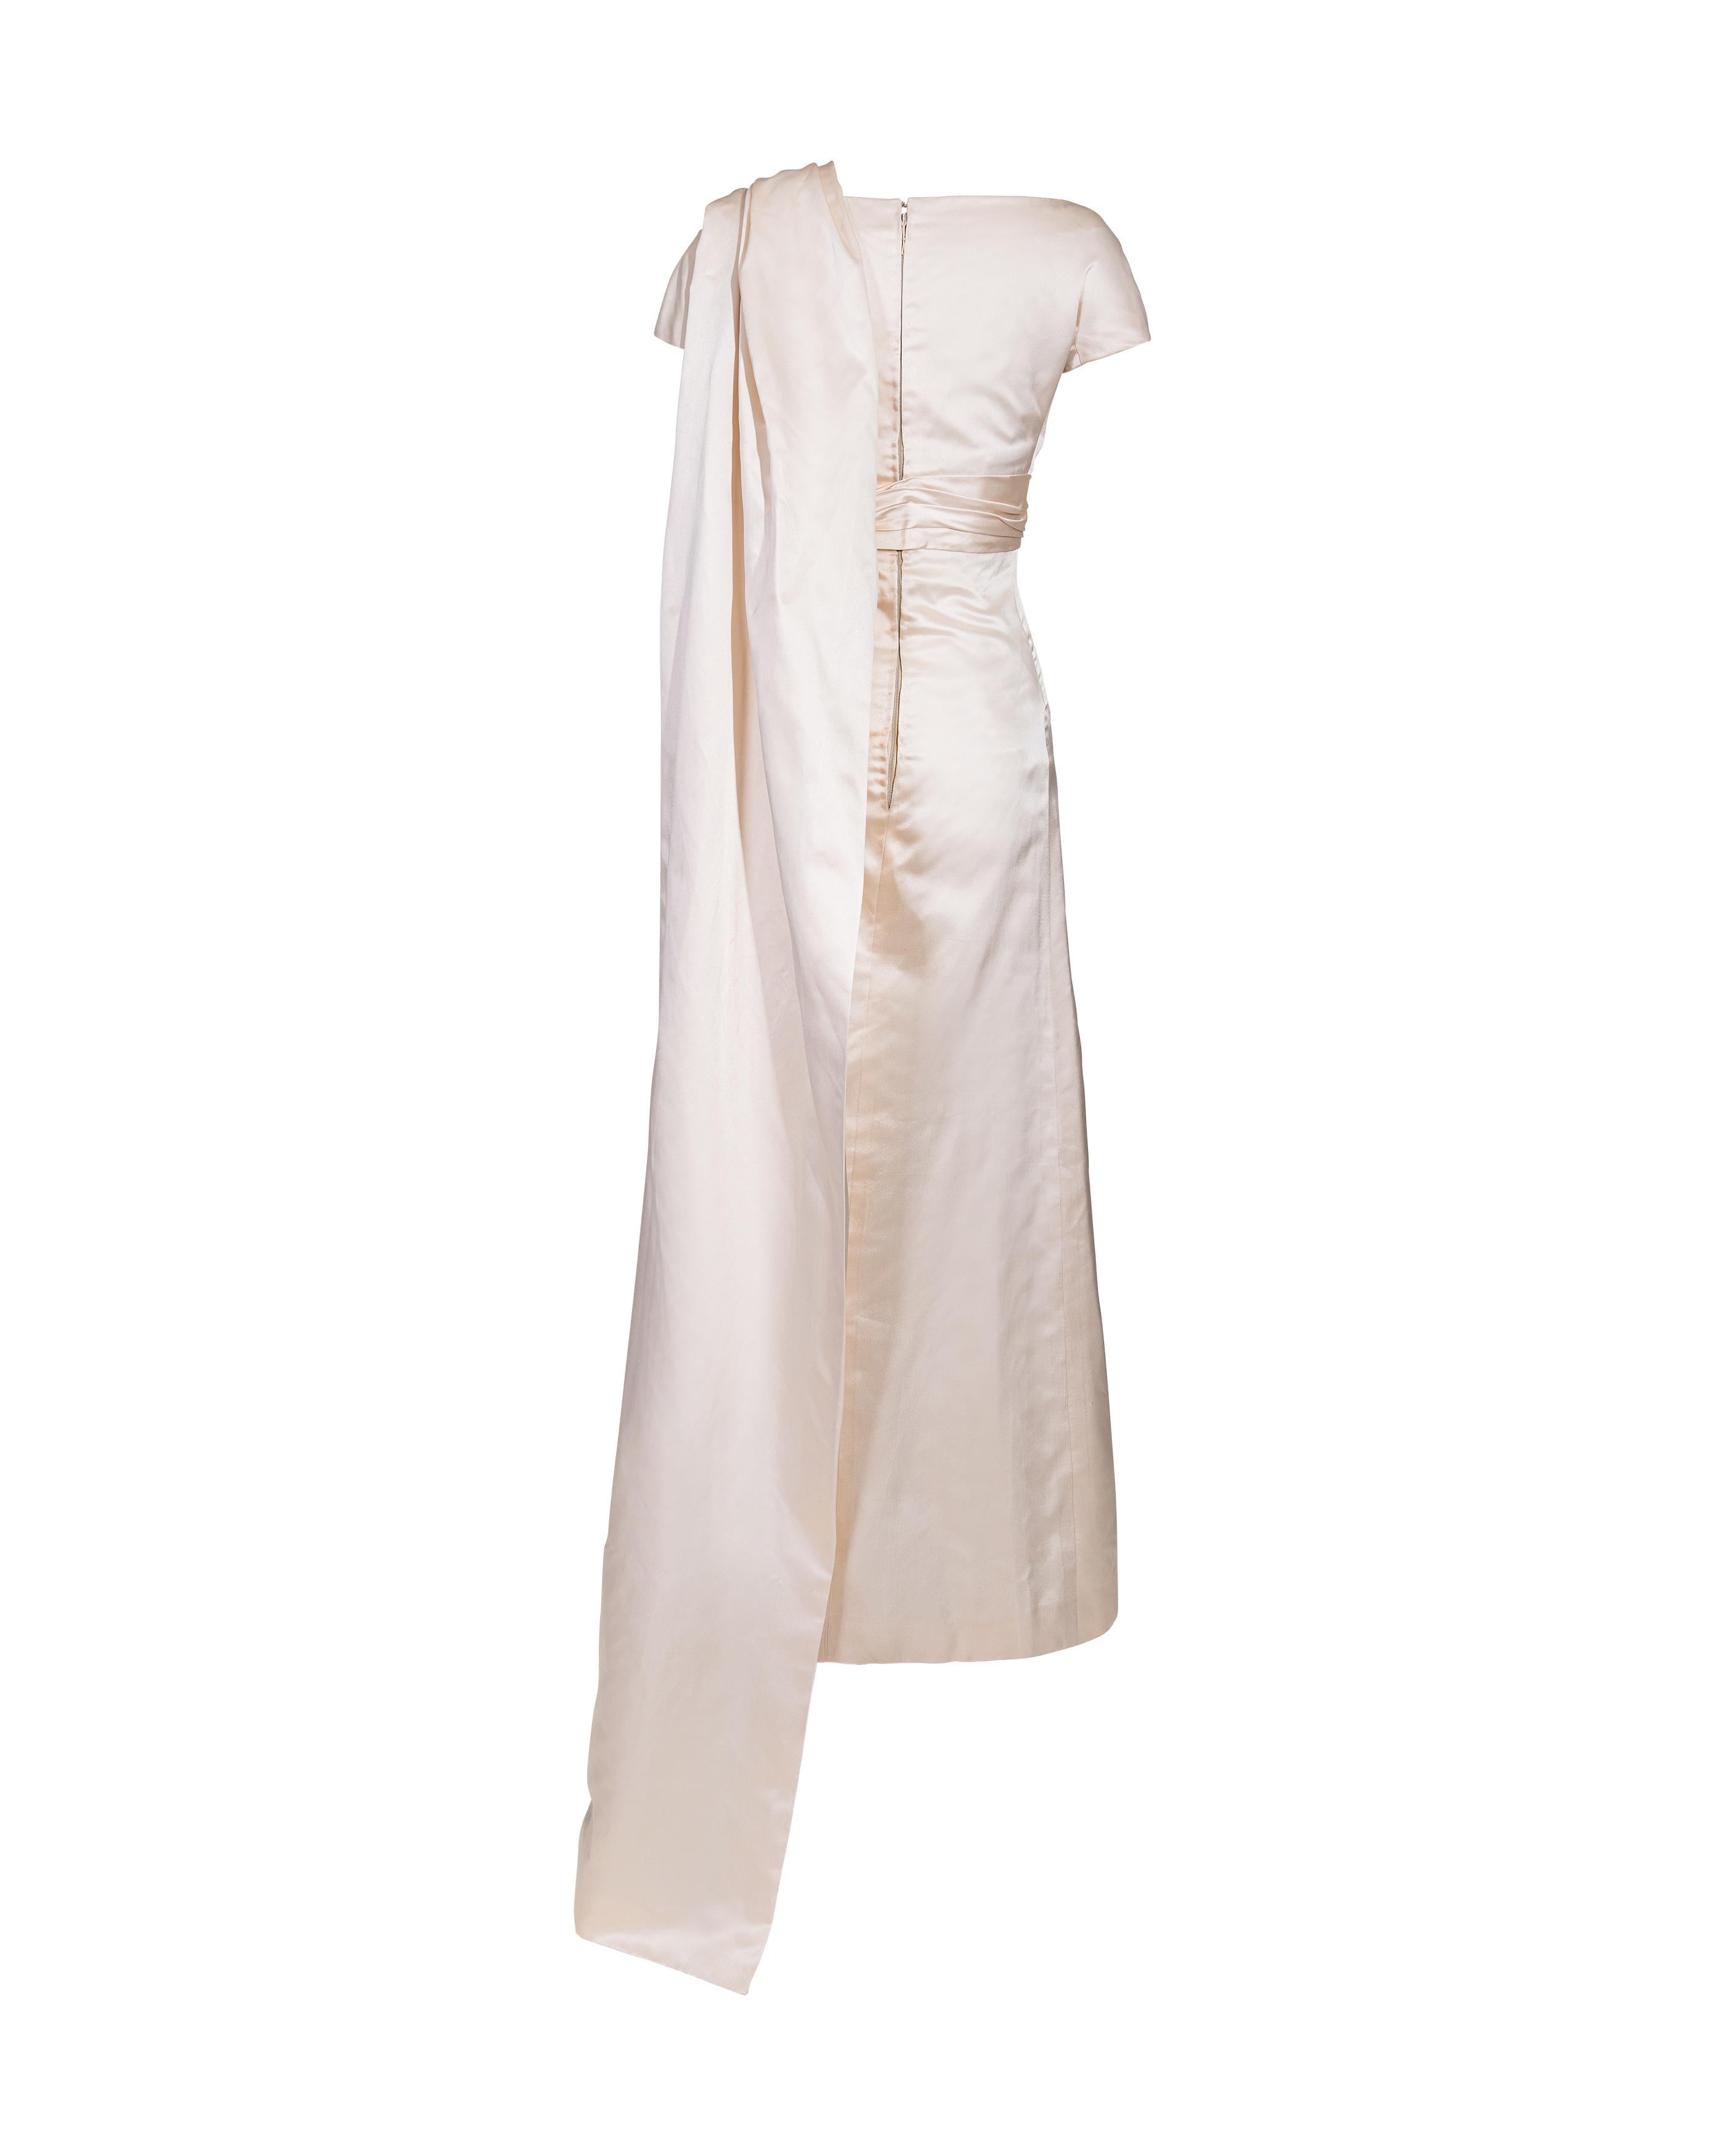 S/S 1955 Christian Dior (Attributed) Short Sleeve Ecru Satin Gown with Sash 2